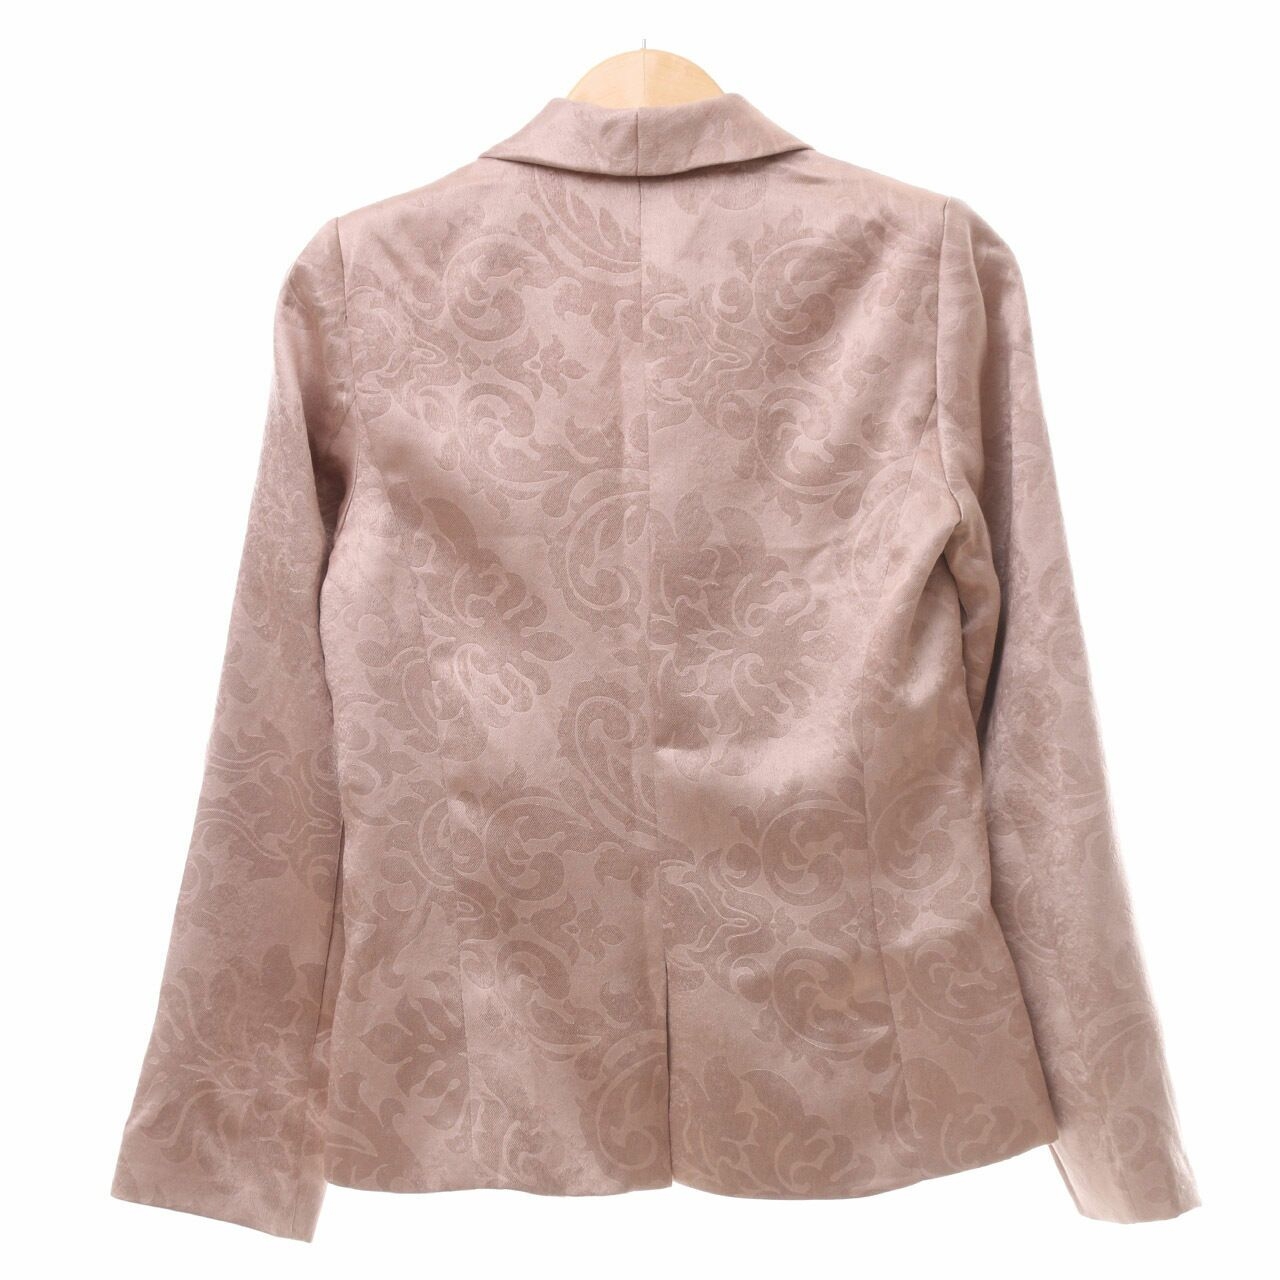 Collate The Label Disney Beauty And The Beast Beige Blazer